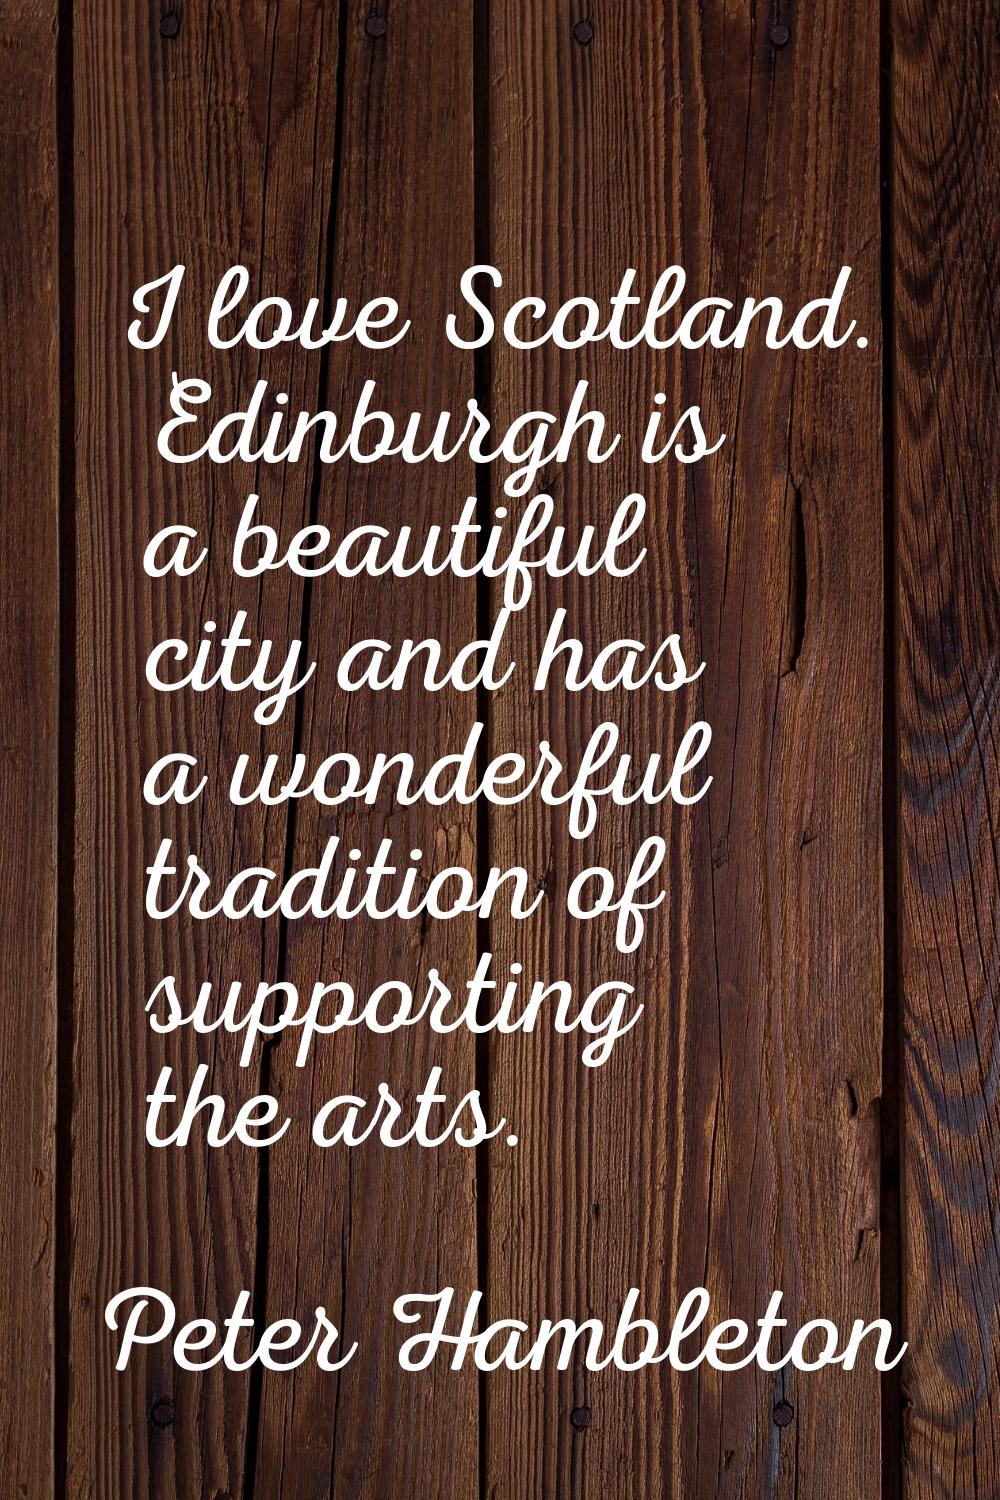 I love Scotland. Edinburgh is a beautiful city and has a wonderful tradition of supporting the arts